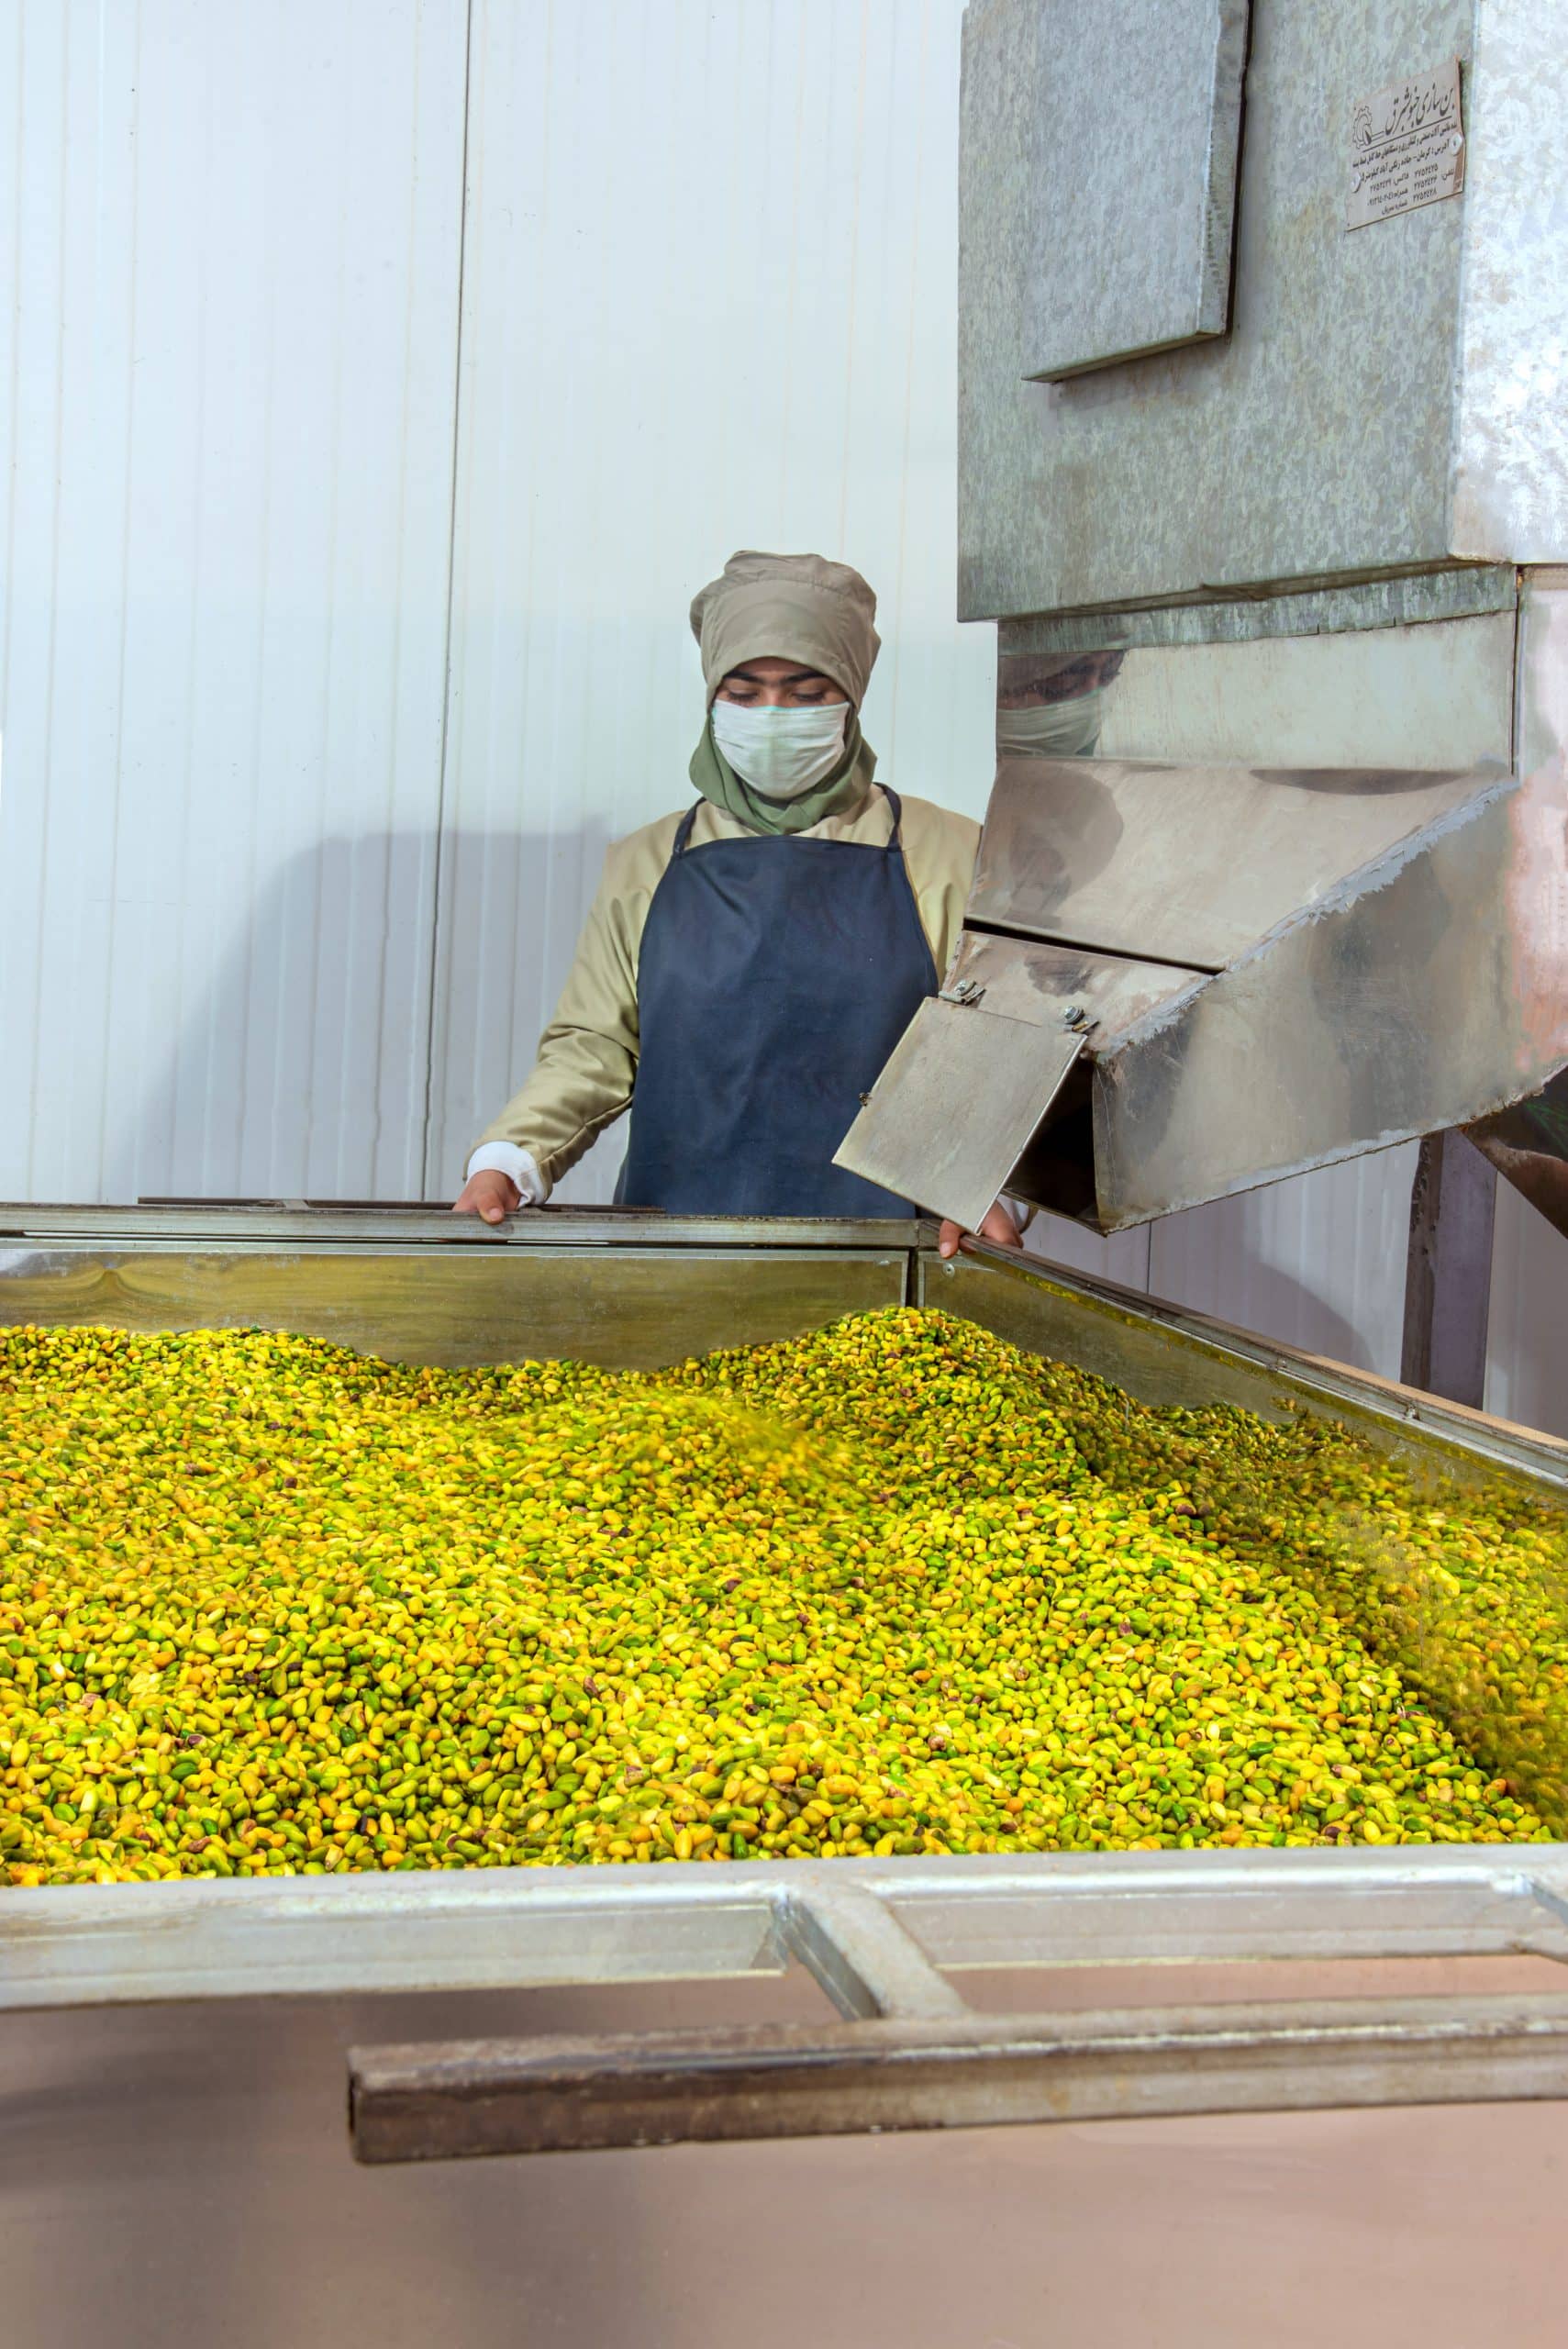 What are the Health and Safety Measures in Pistachio Companies?